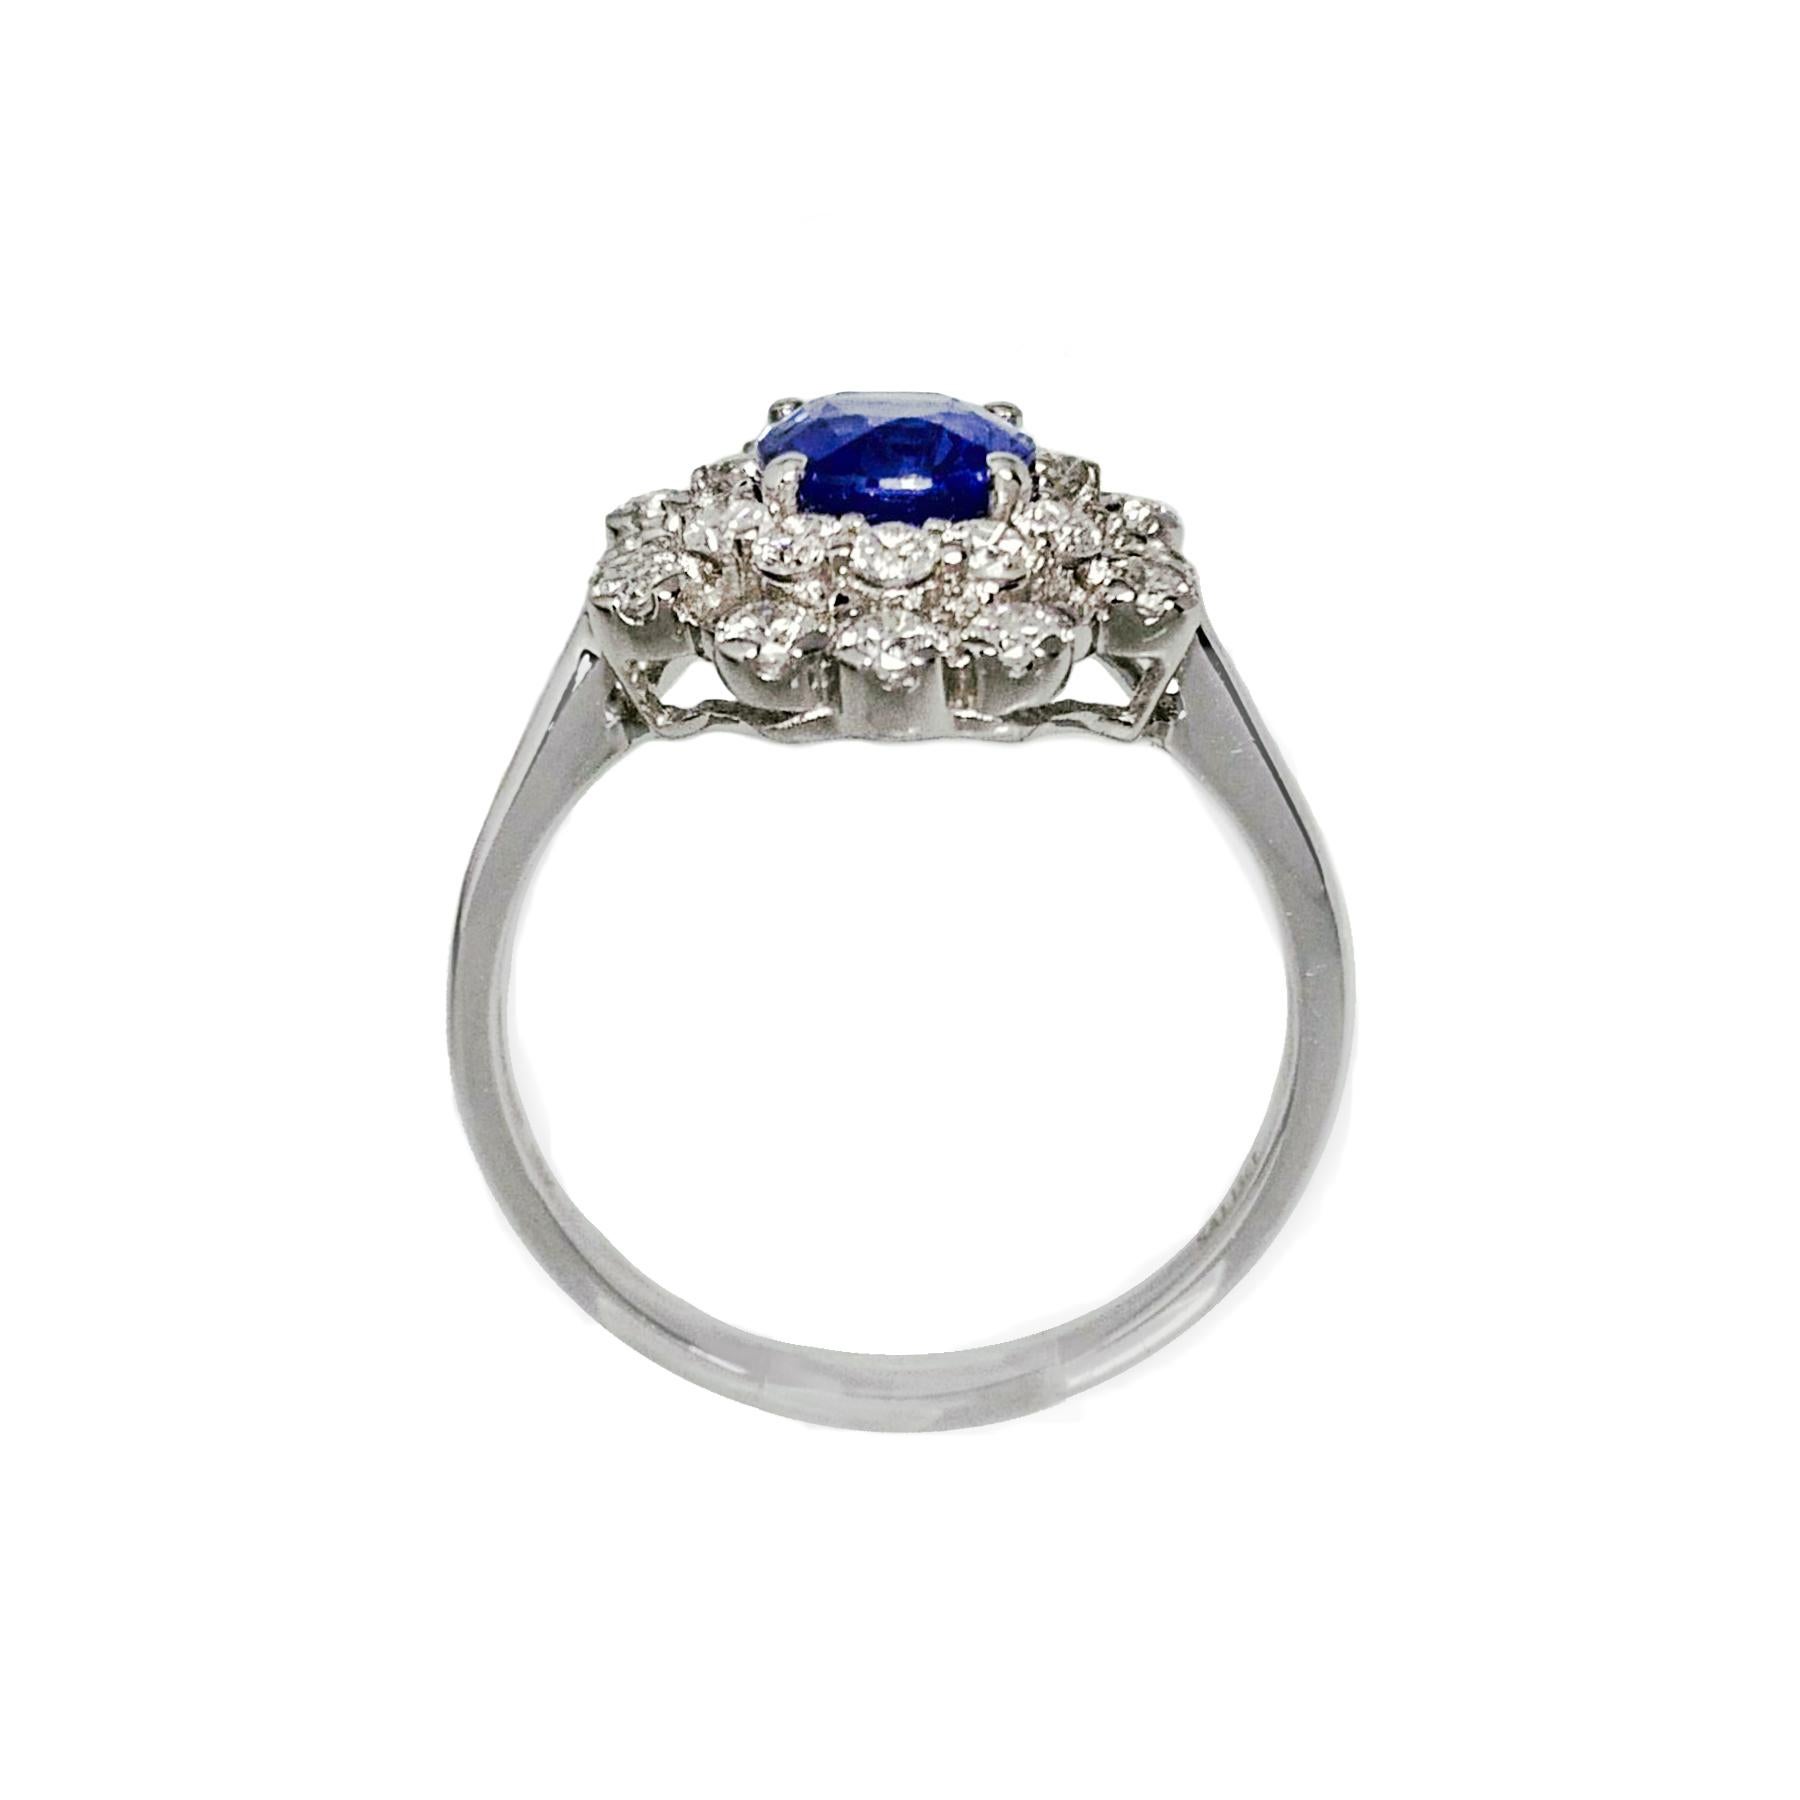 Contemporary Sapphire 1.14 Carat White Gold Cocktail Ring